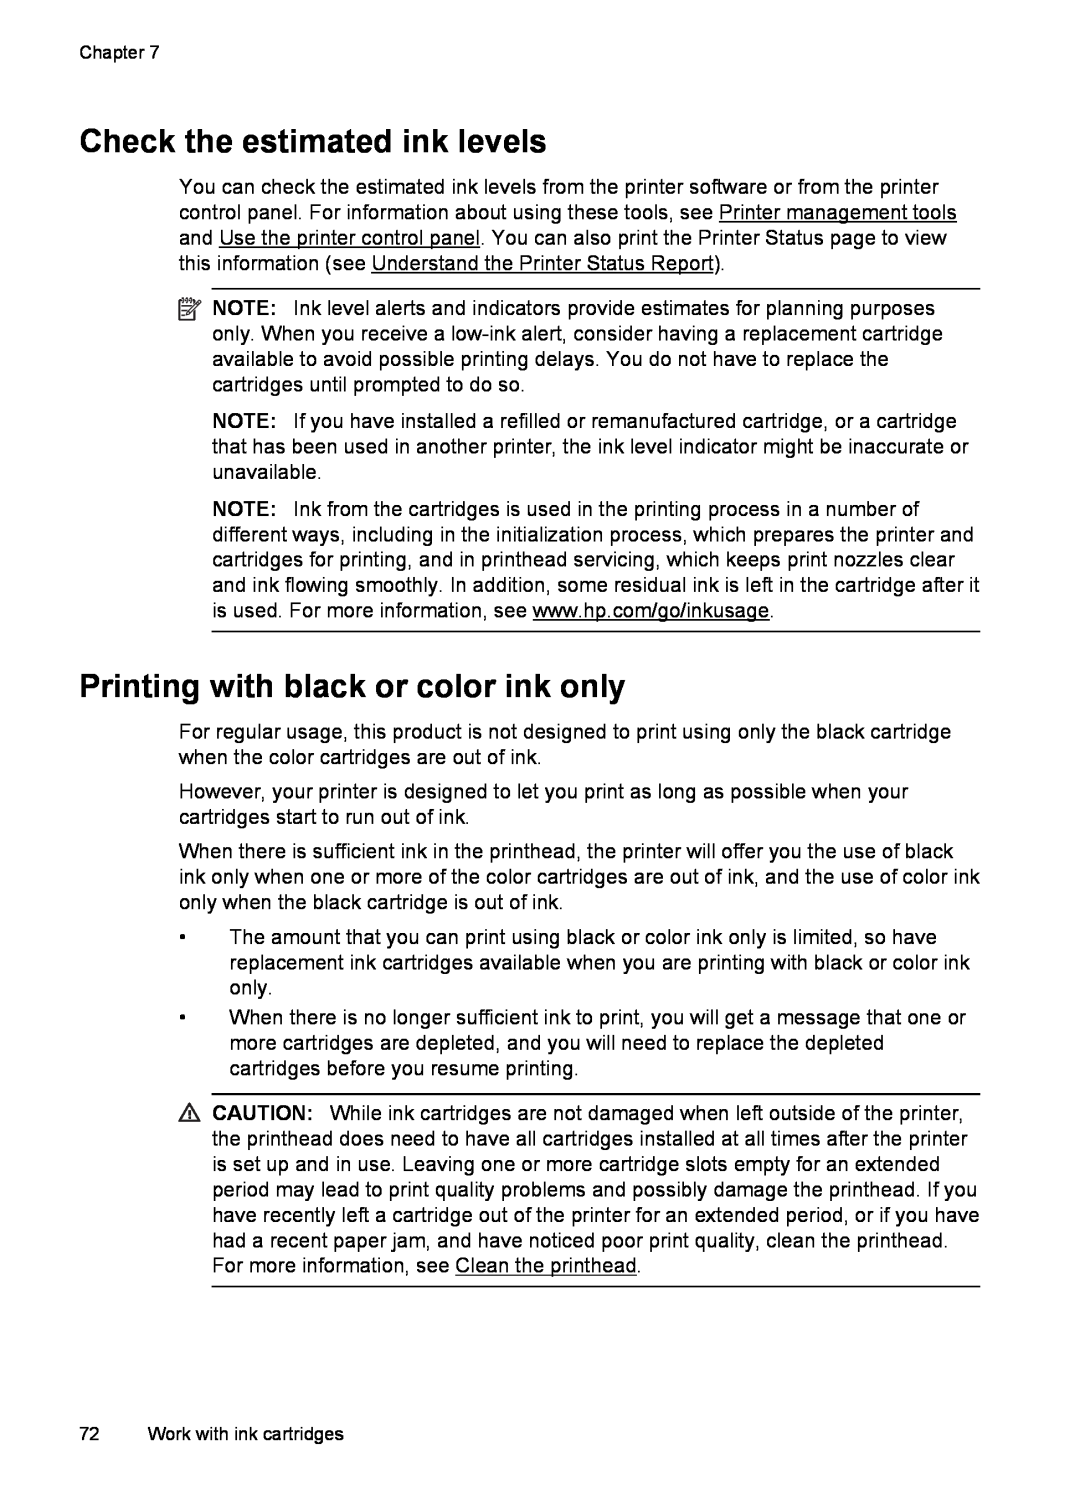 HP 6600 - H7 manual Check the estimated ink levels, Printing with black or color ink only 